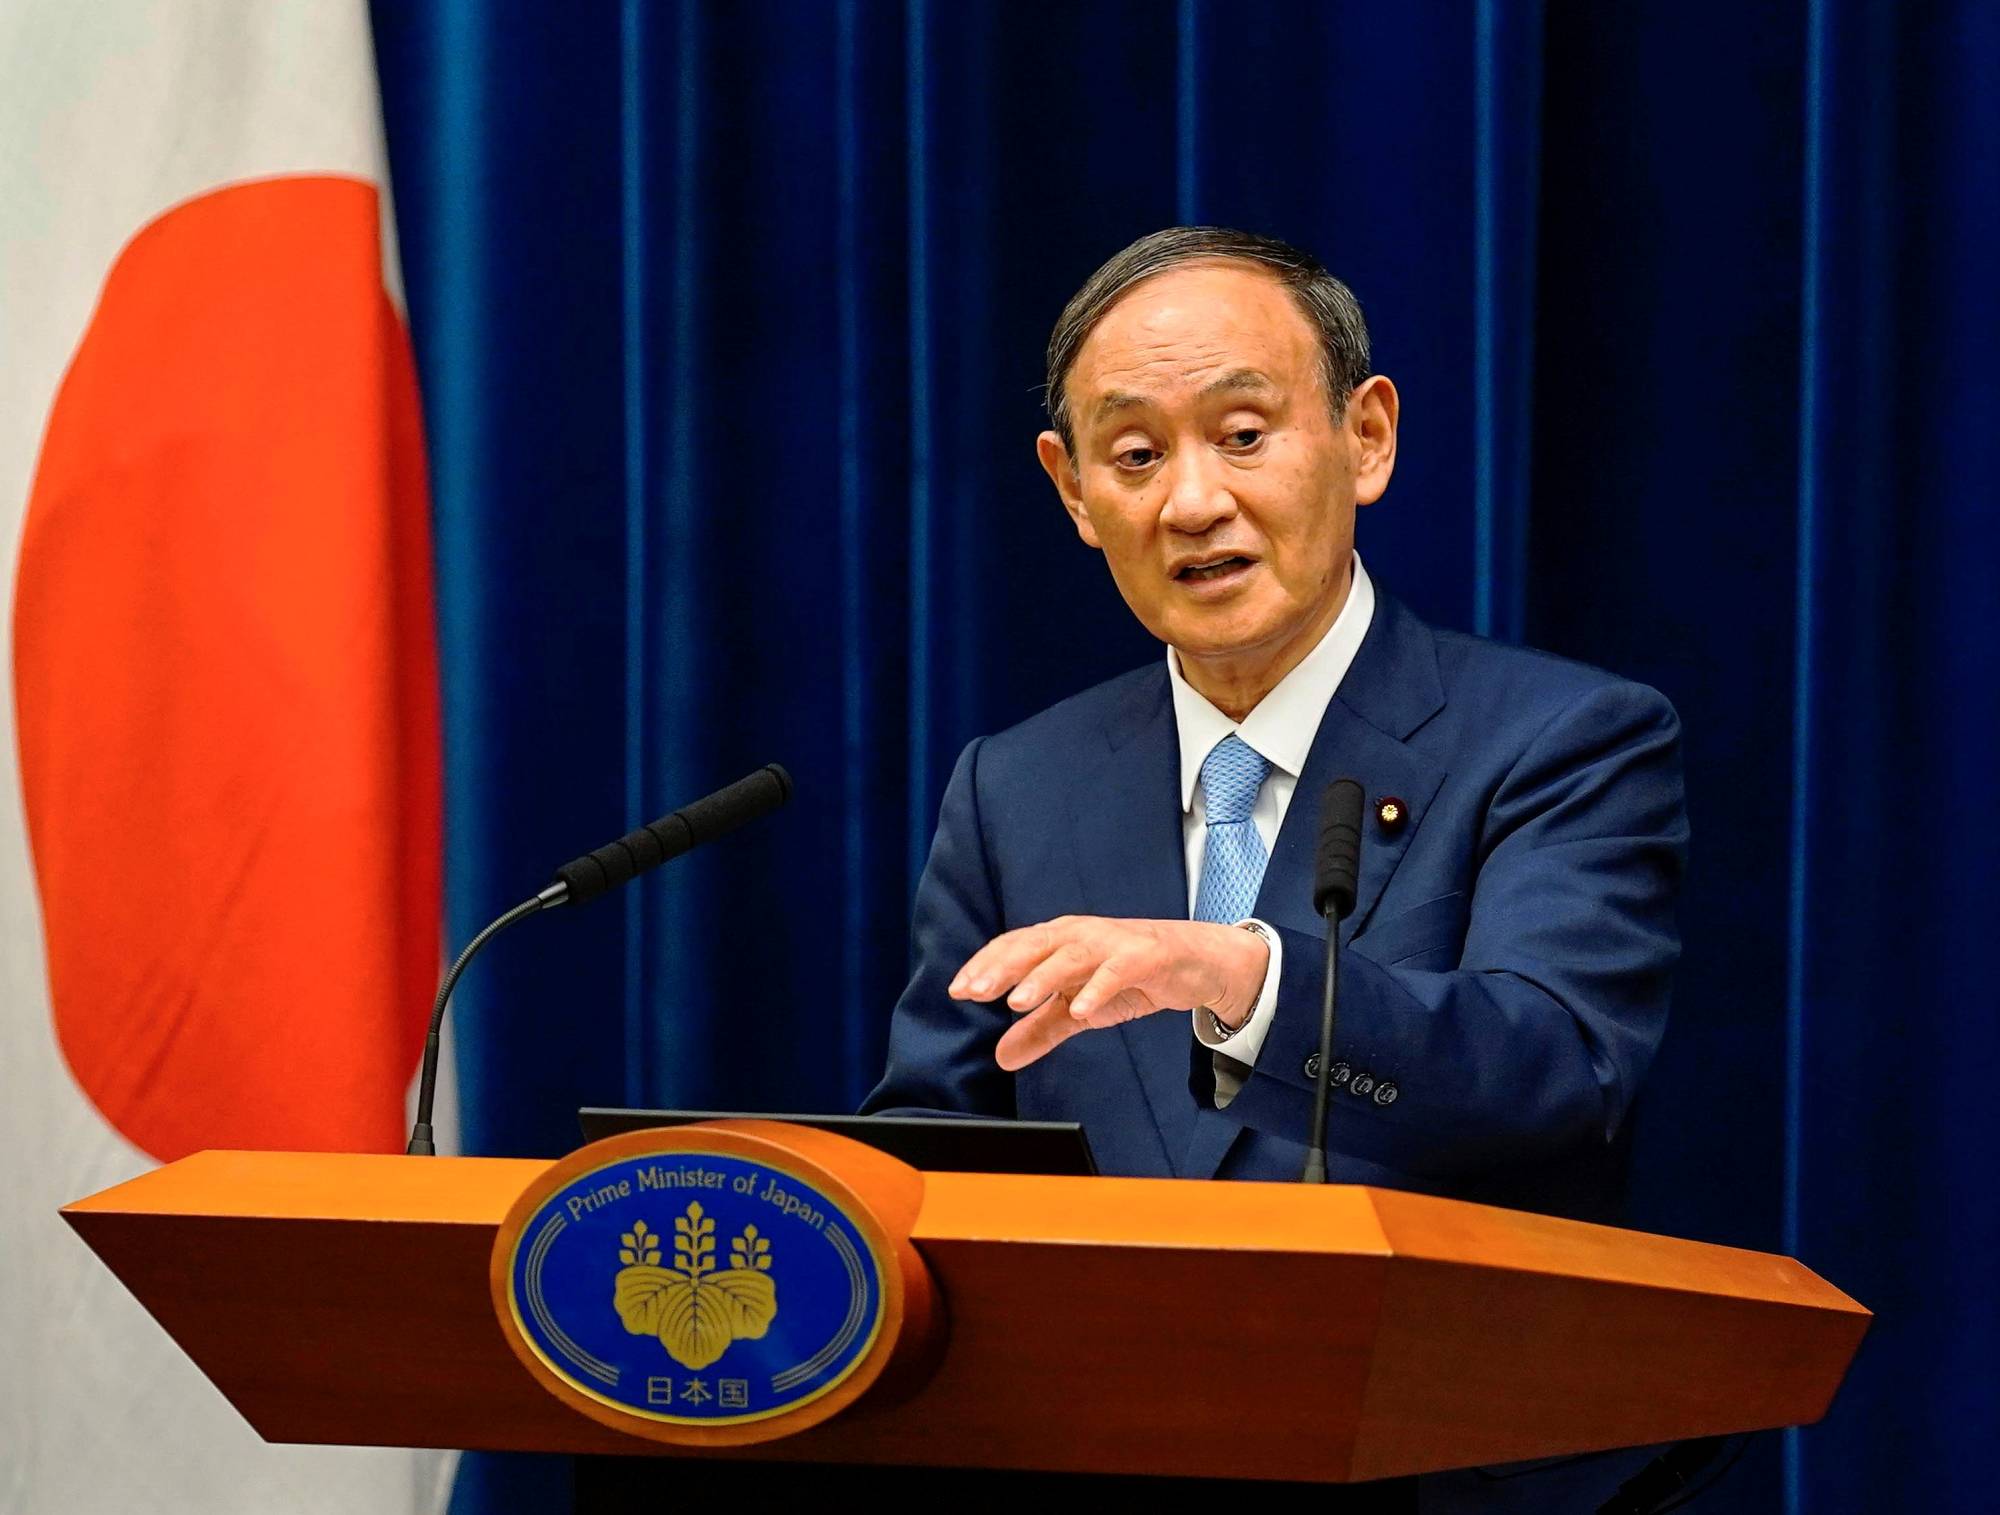 Prime Minister Yoshihide Suga speaks during a news conference announcing the extension of a state of emergency, in Tokyo on Aug. 17. | POOL / VIA REUTERS